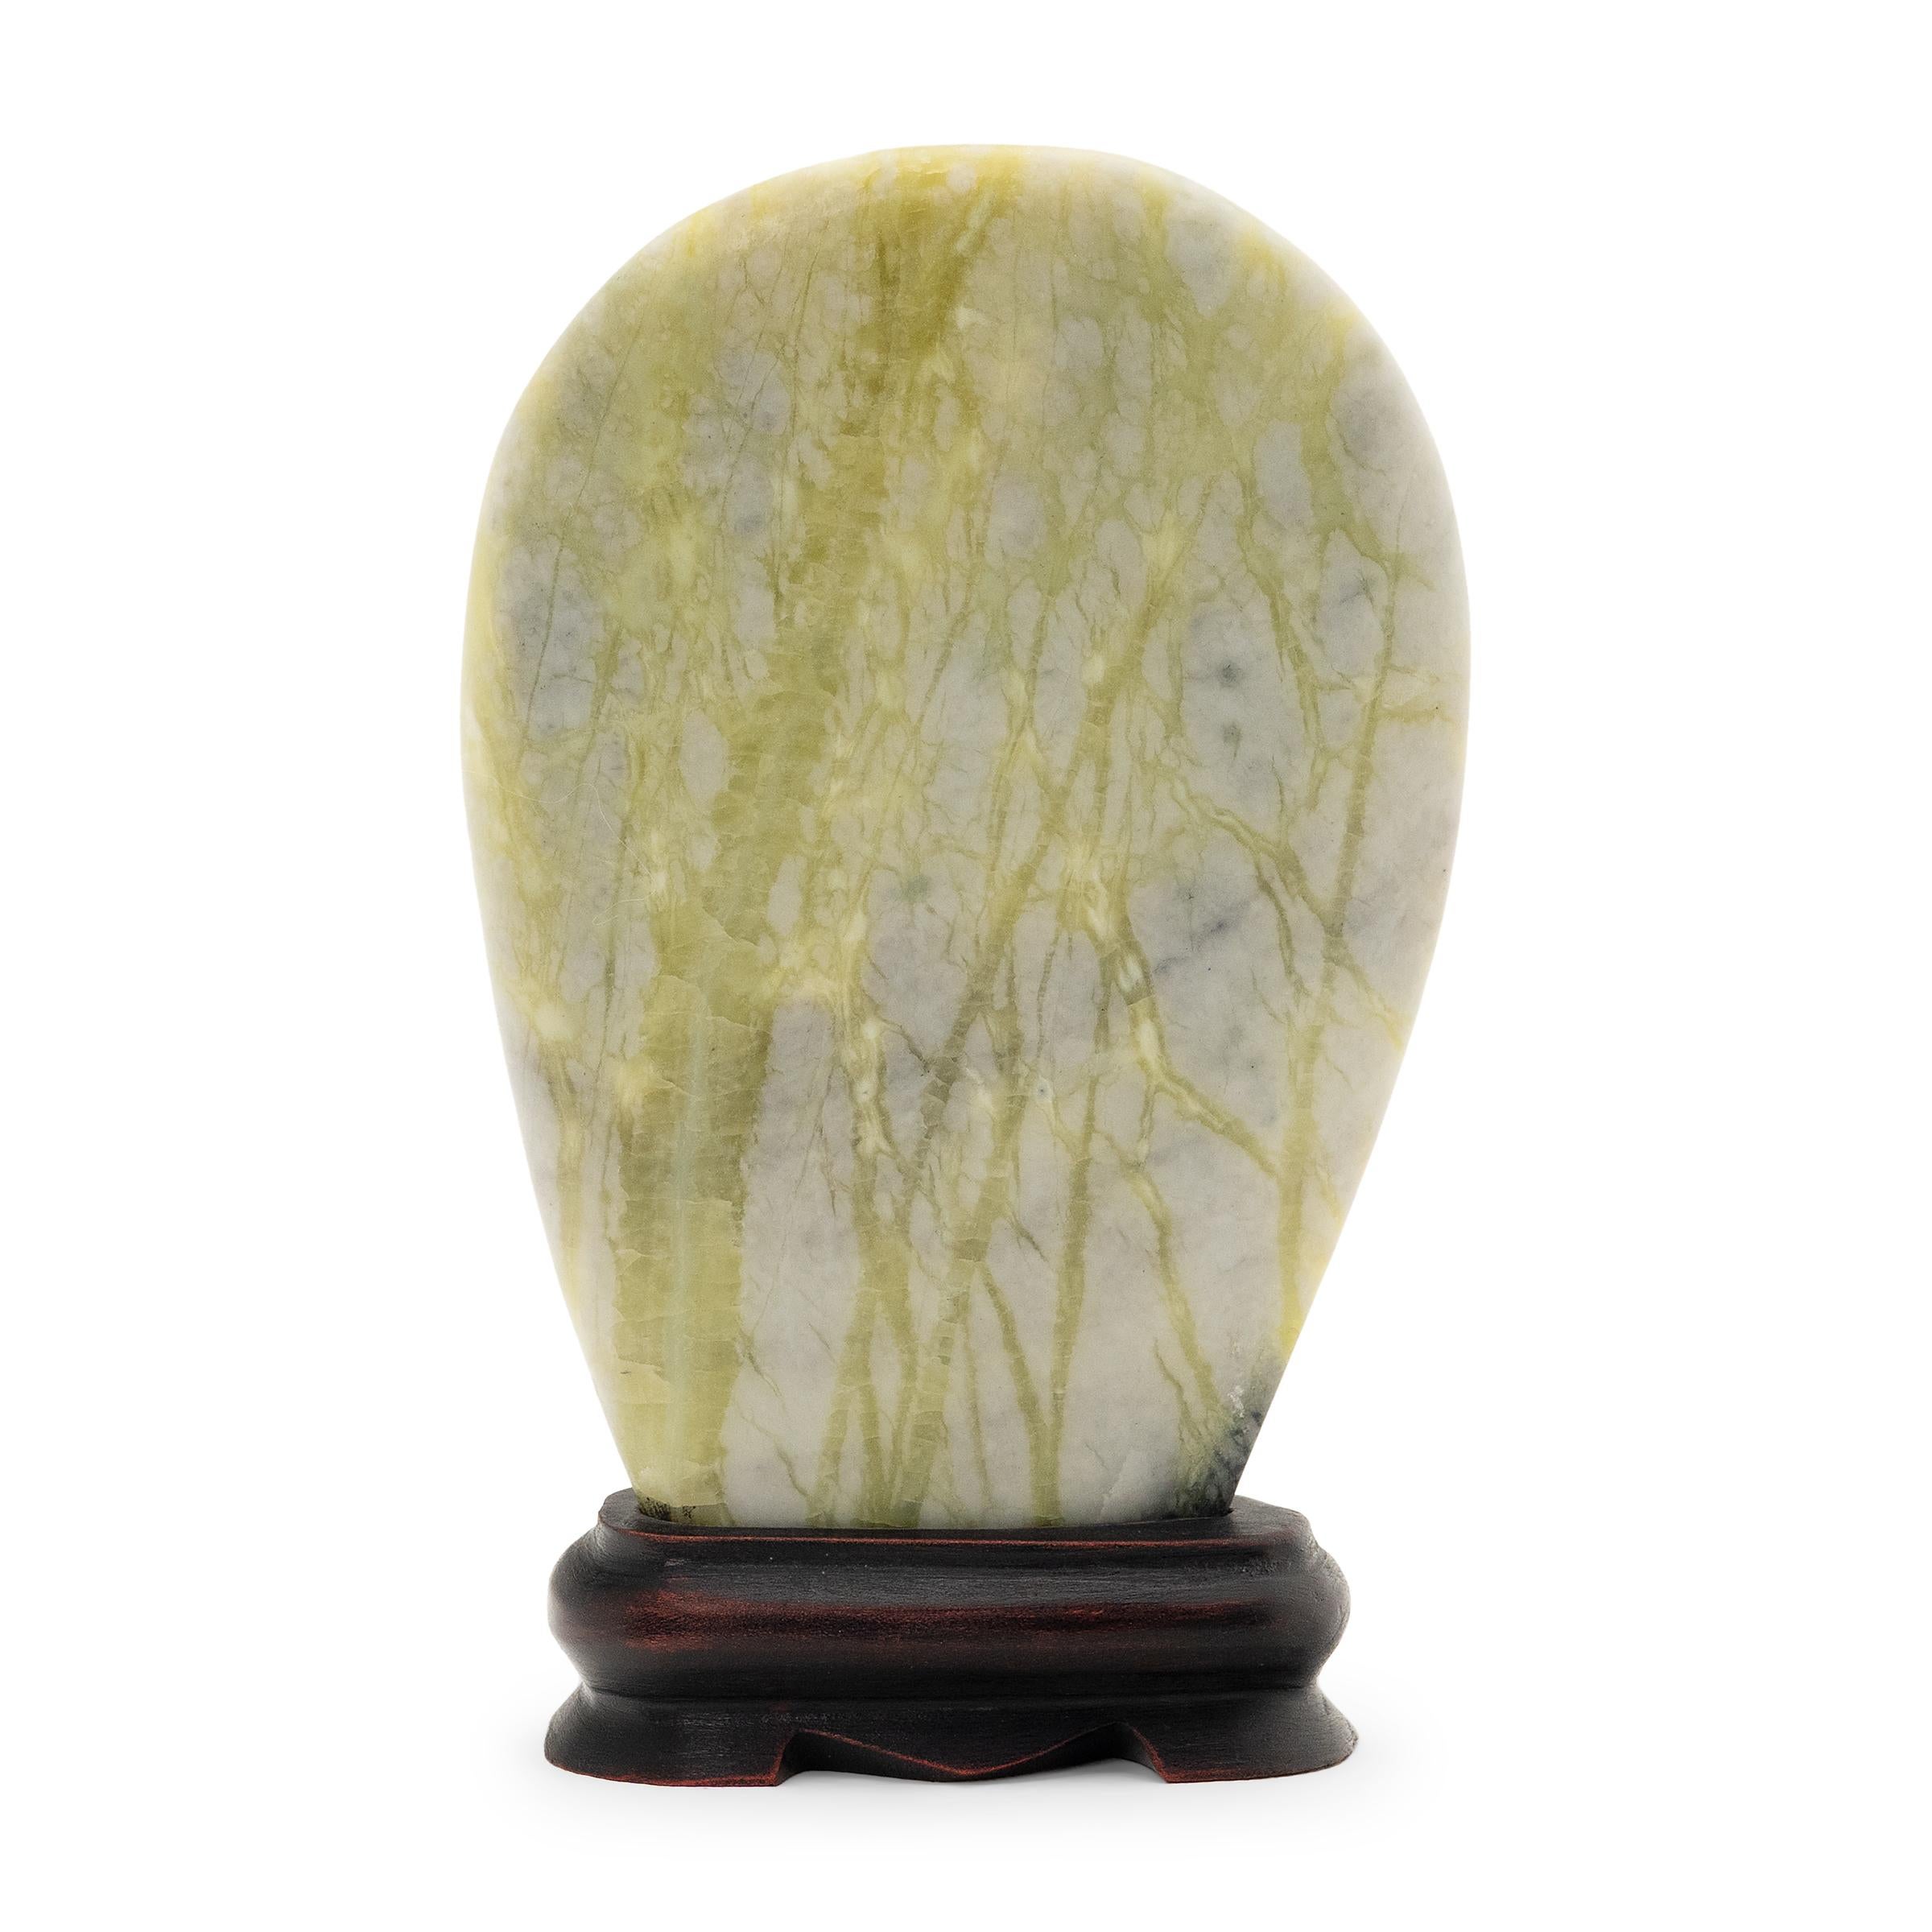 A well-chosen stone is a resting place for the mind, inspiring calm and contemplation. Marked by green and gray currents of jadeite, moss agate, and serpentine, this petite greenery stone evokes the grandeur of nature with beautifully irregular